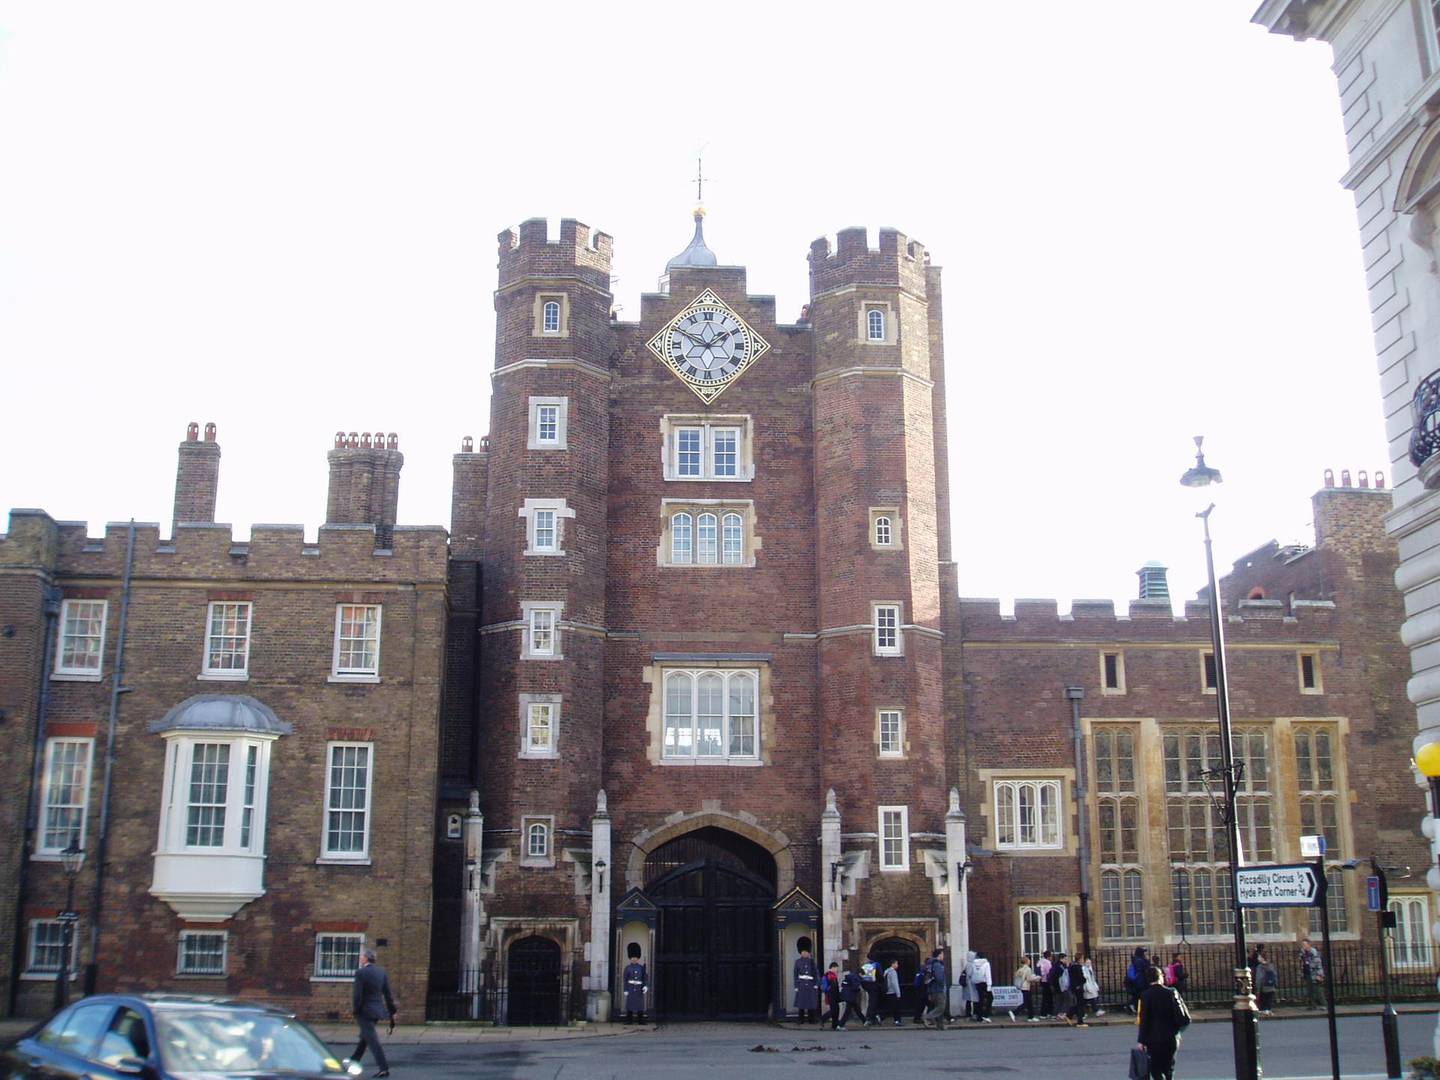 The exterior of St James's Palace, Princess Beatrice's London residence. Wikicommons 